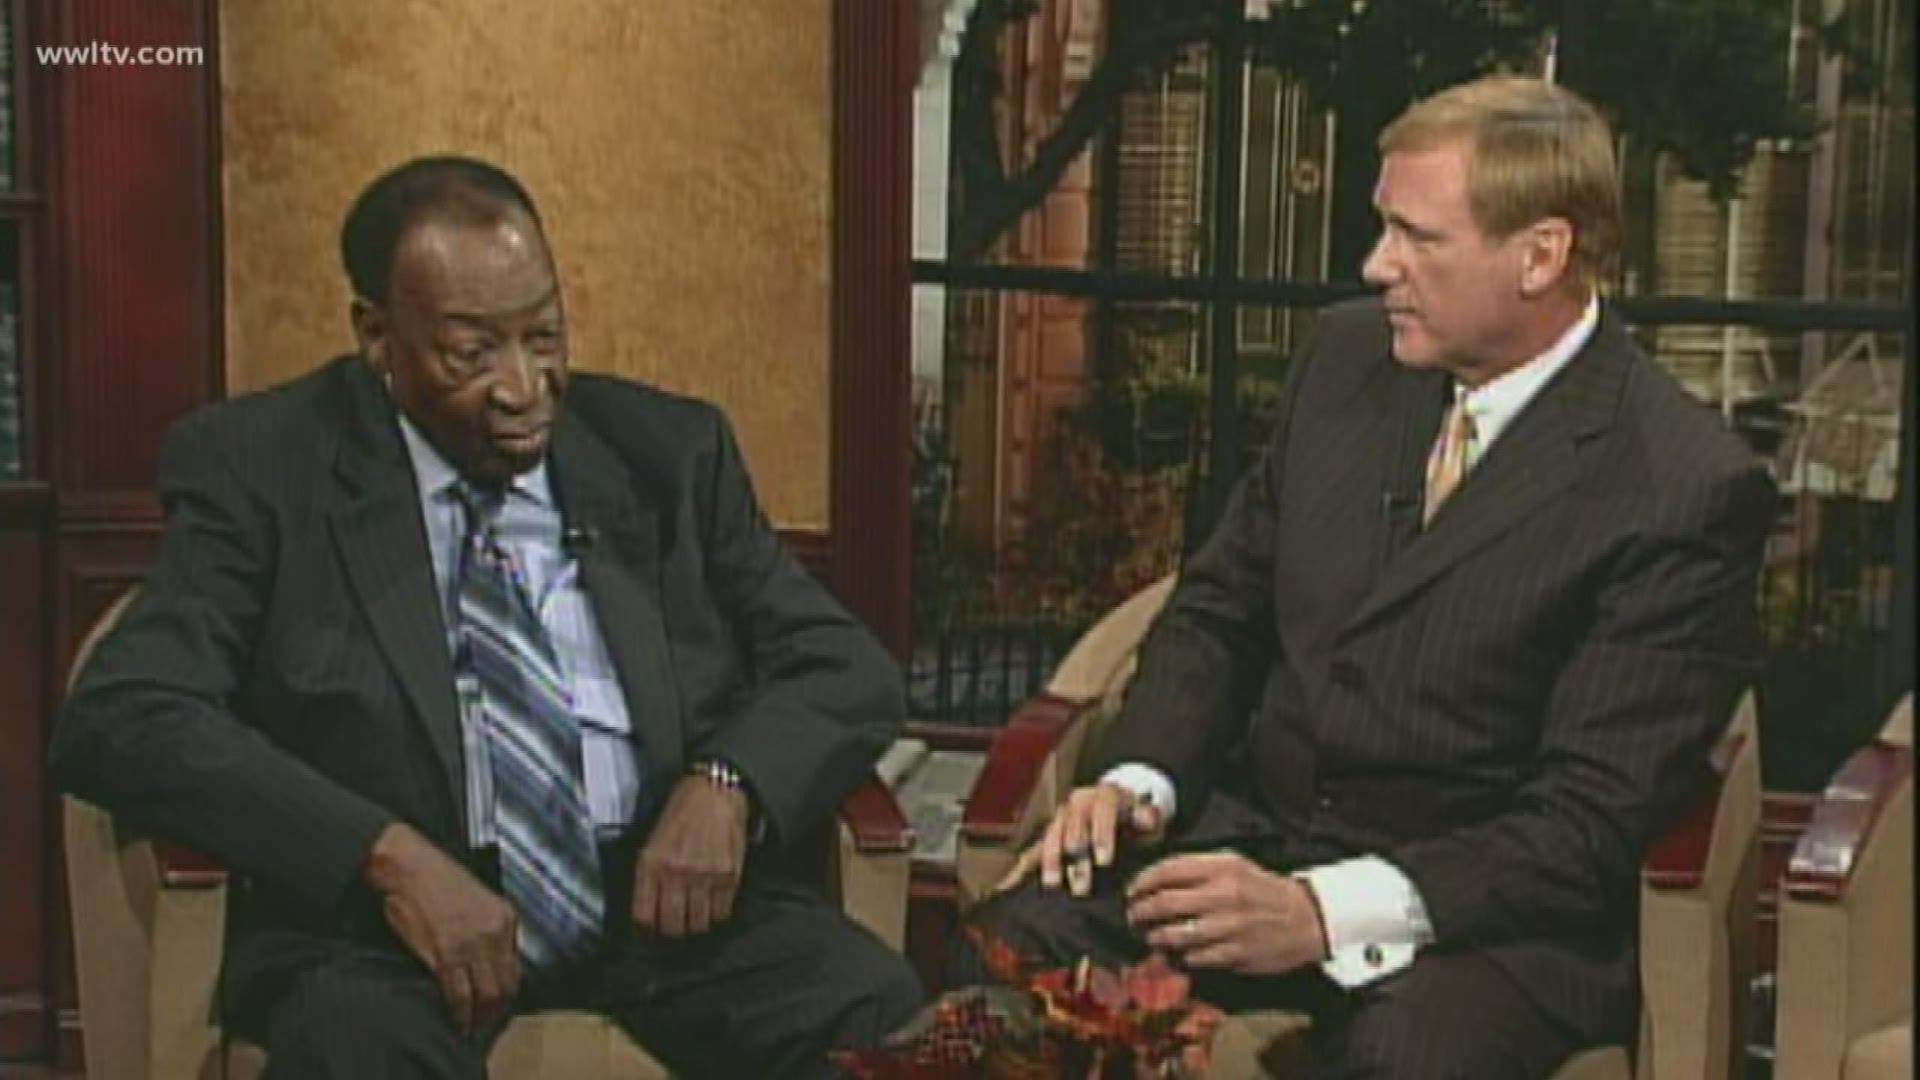 WWL-TV anchor Eric Paulsen revisits an interview he did with Dave Bartholomew, the legendary songwriter, producer, musician and founding father of rock 'n' roll who died June 23 at age 100.